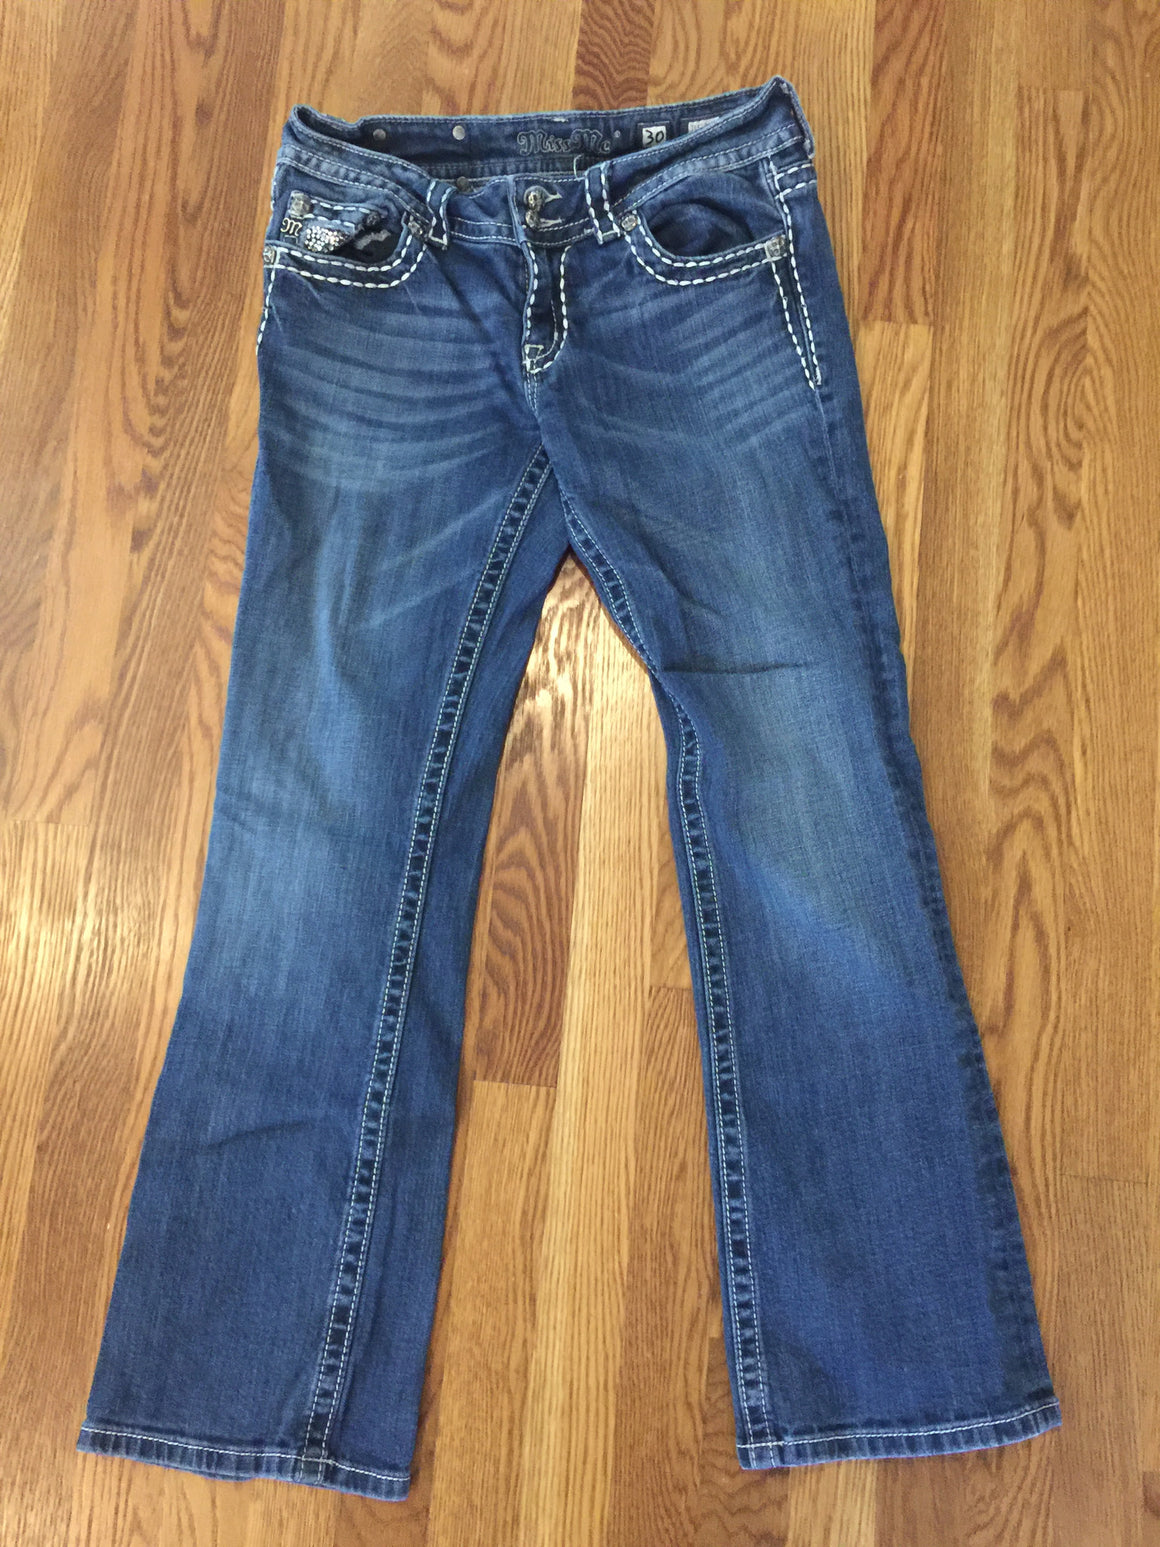 Miss Me Jeans!-New Neu Glamour | Preloved Designer Jewelry, Shoes &amp; Handbags.